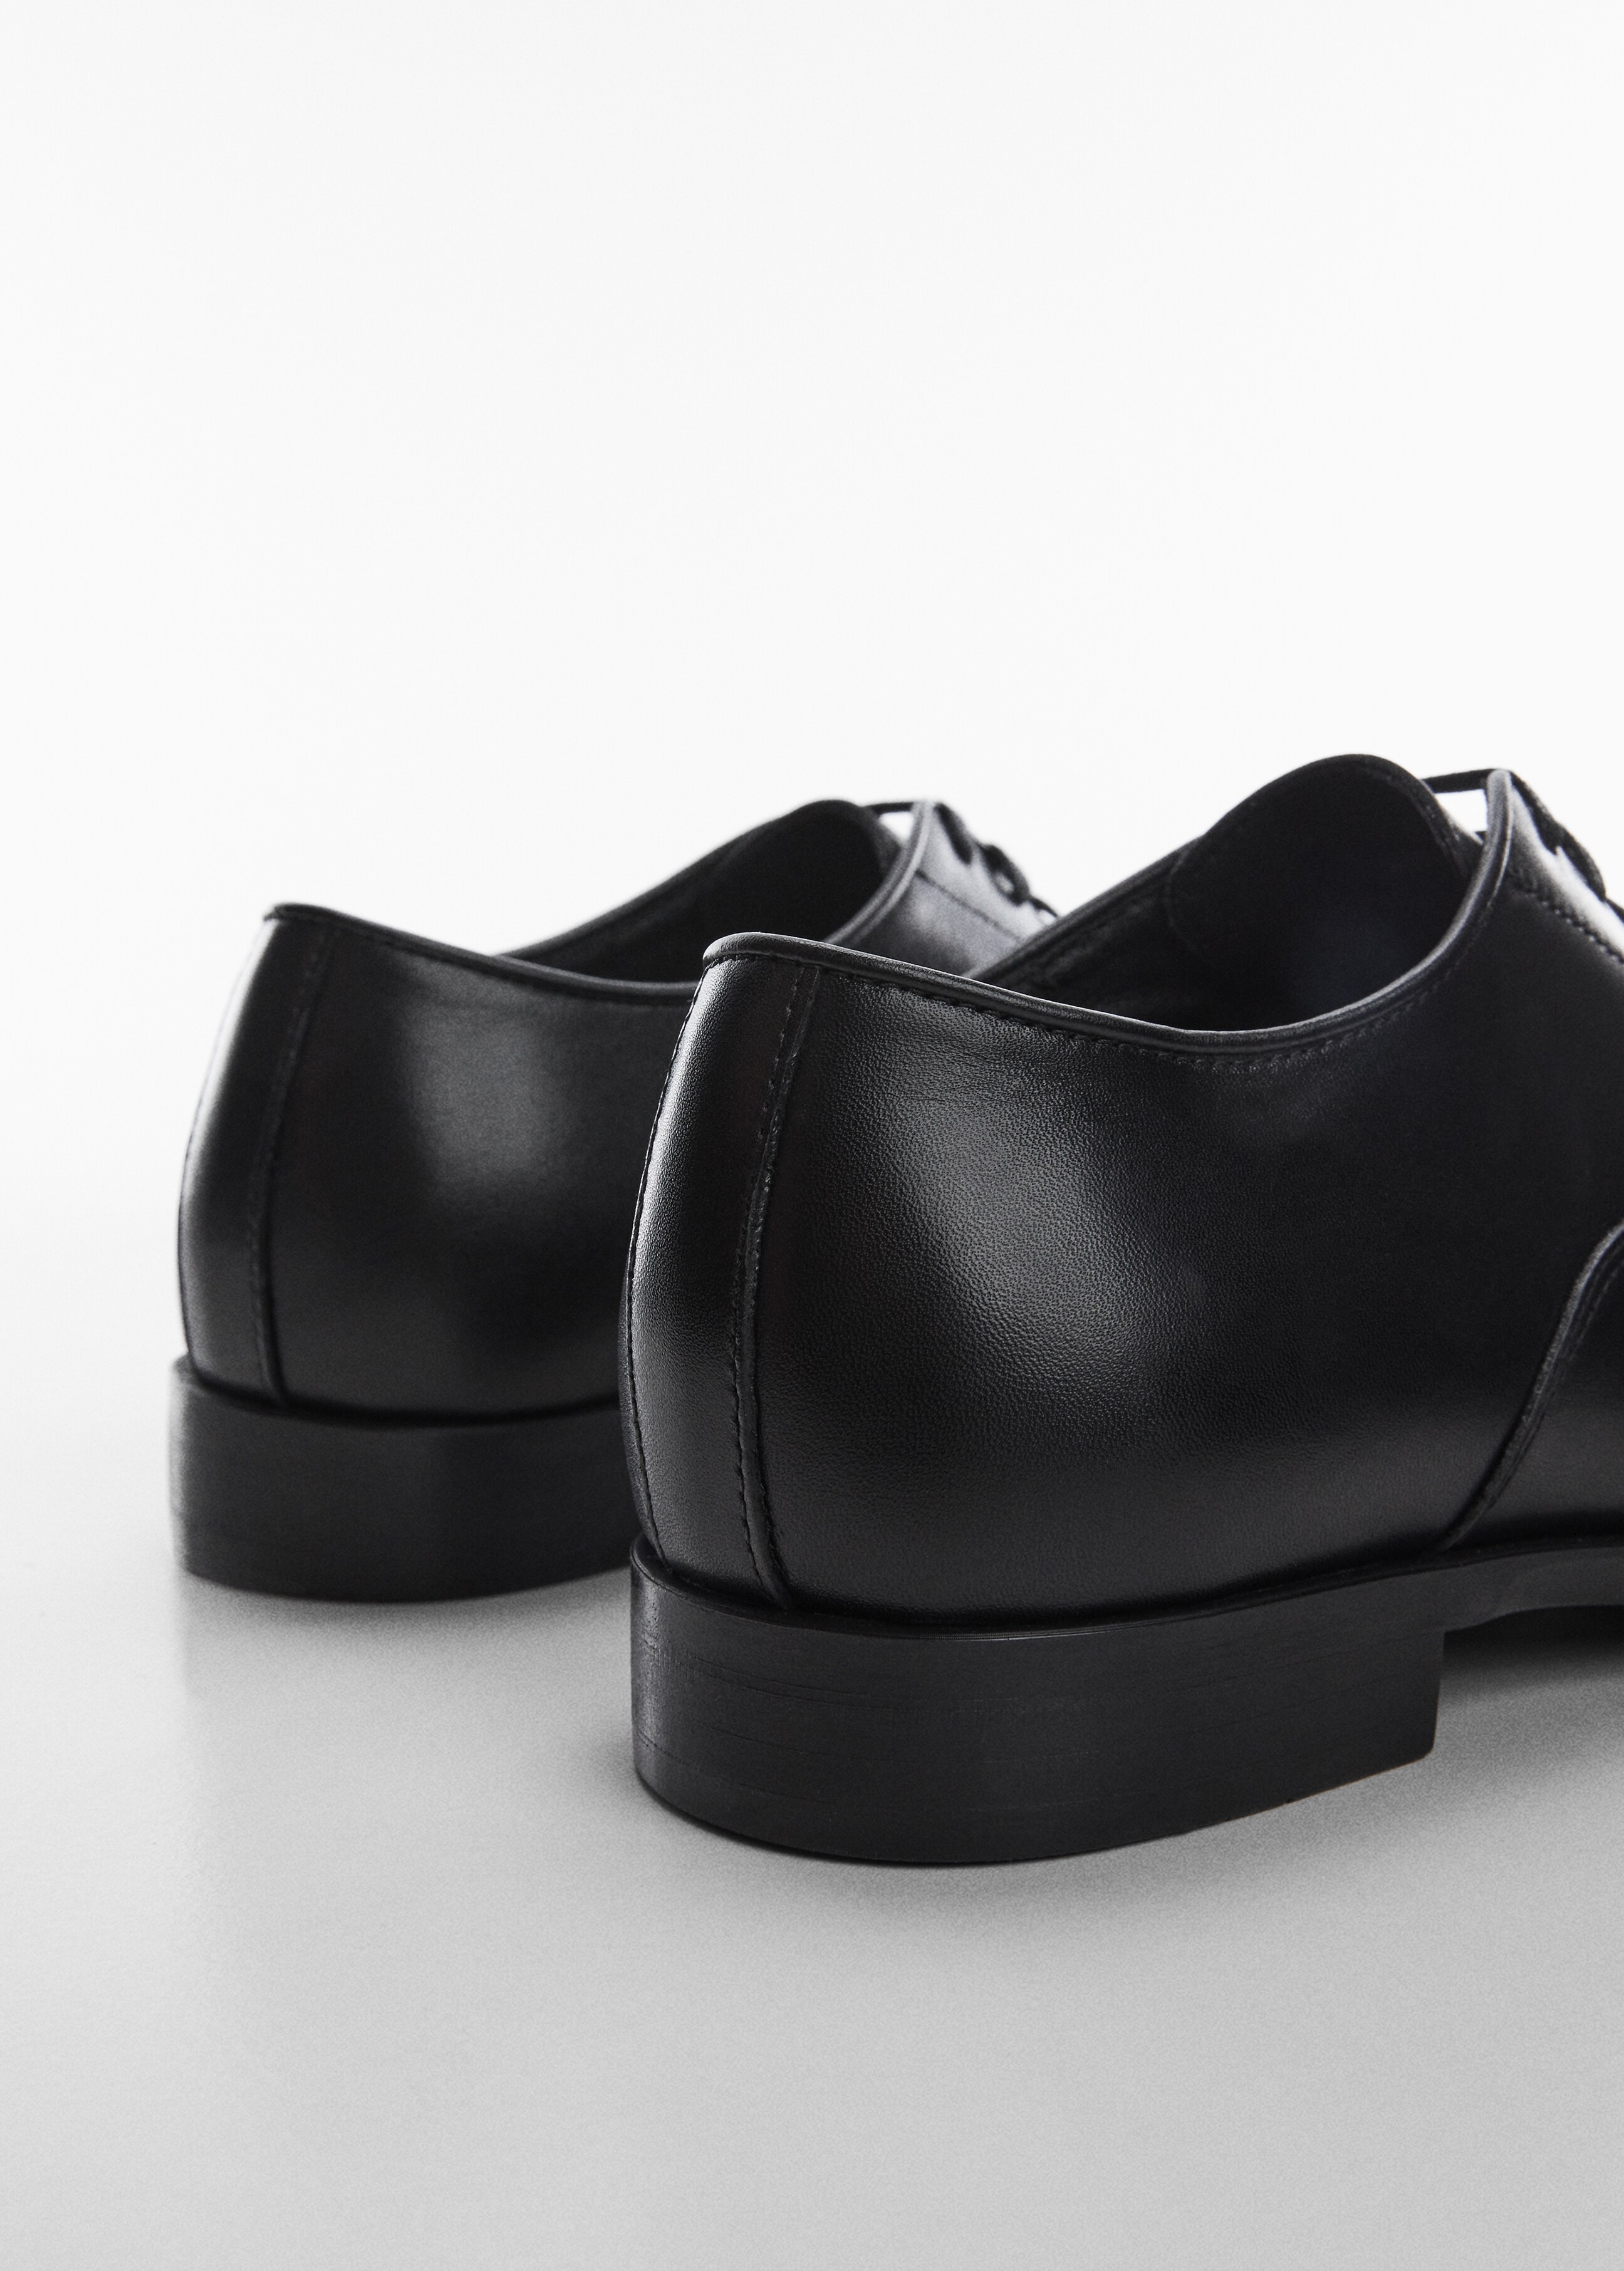 Elongated leather suit shoes - Details of the article 2